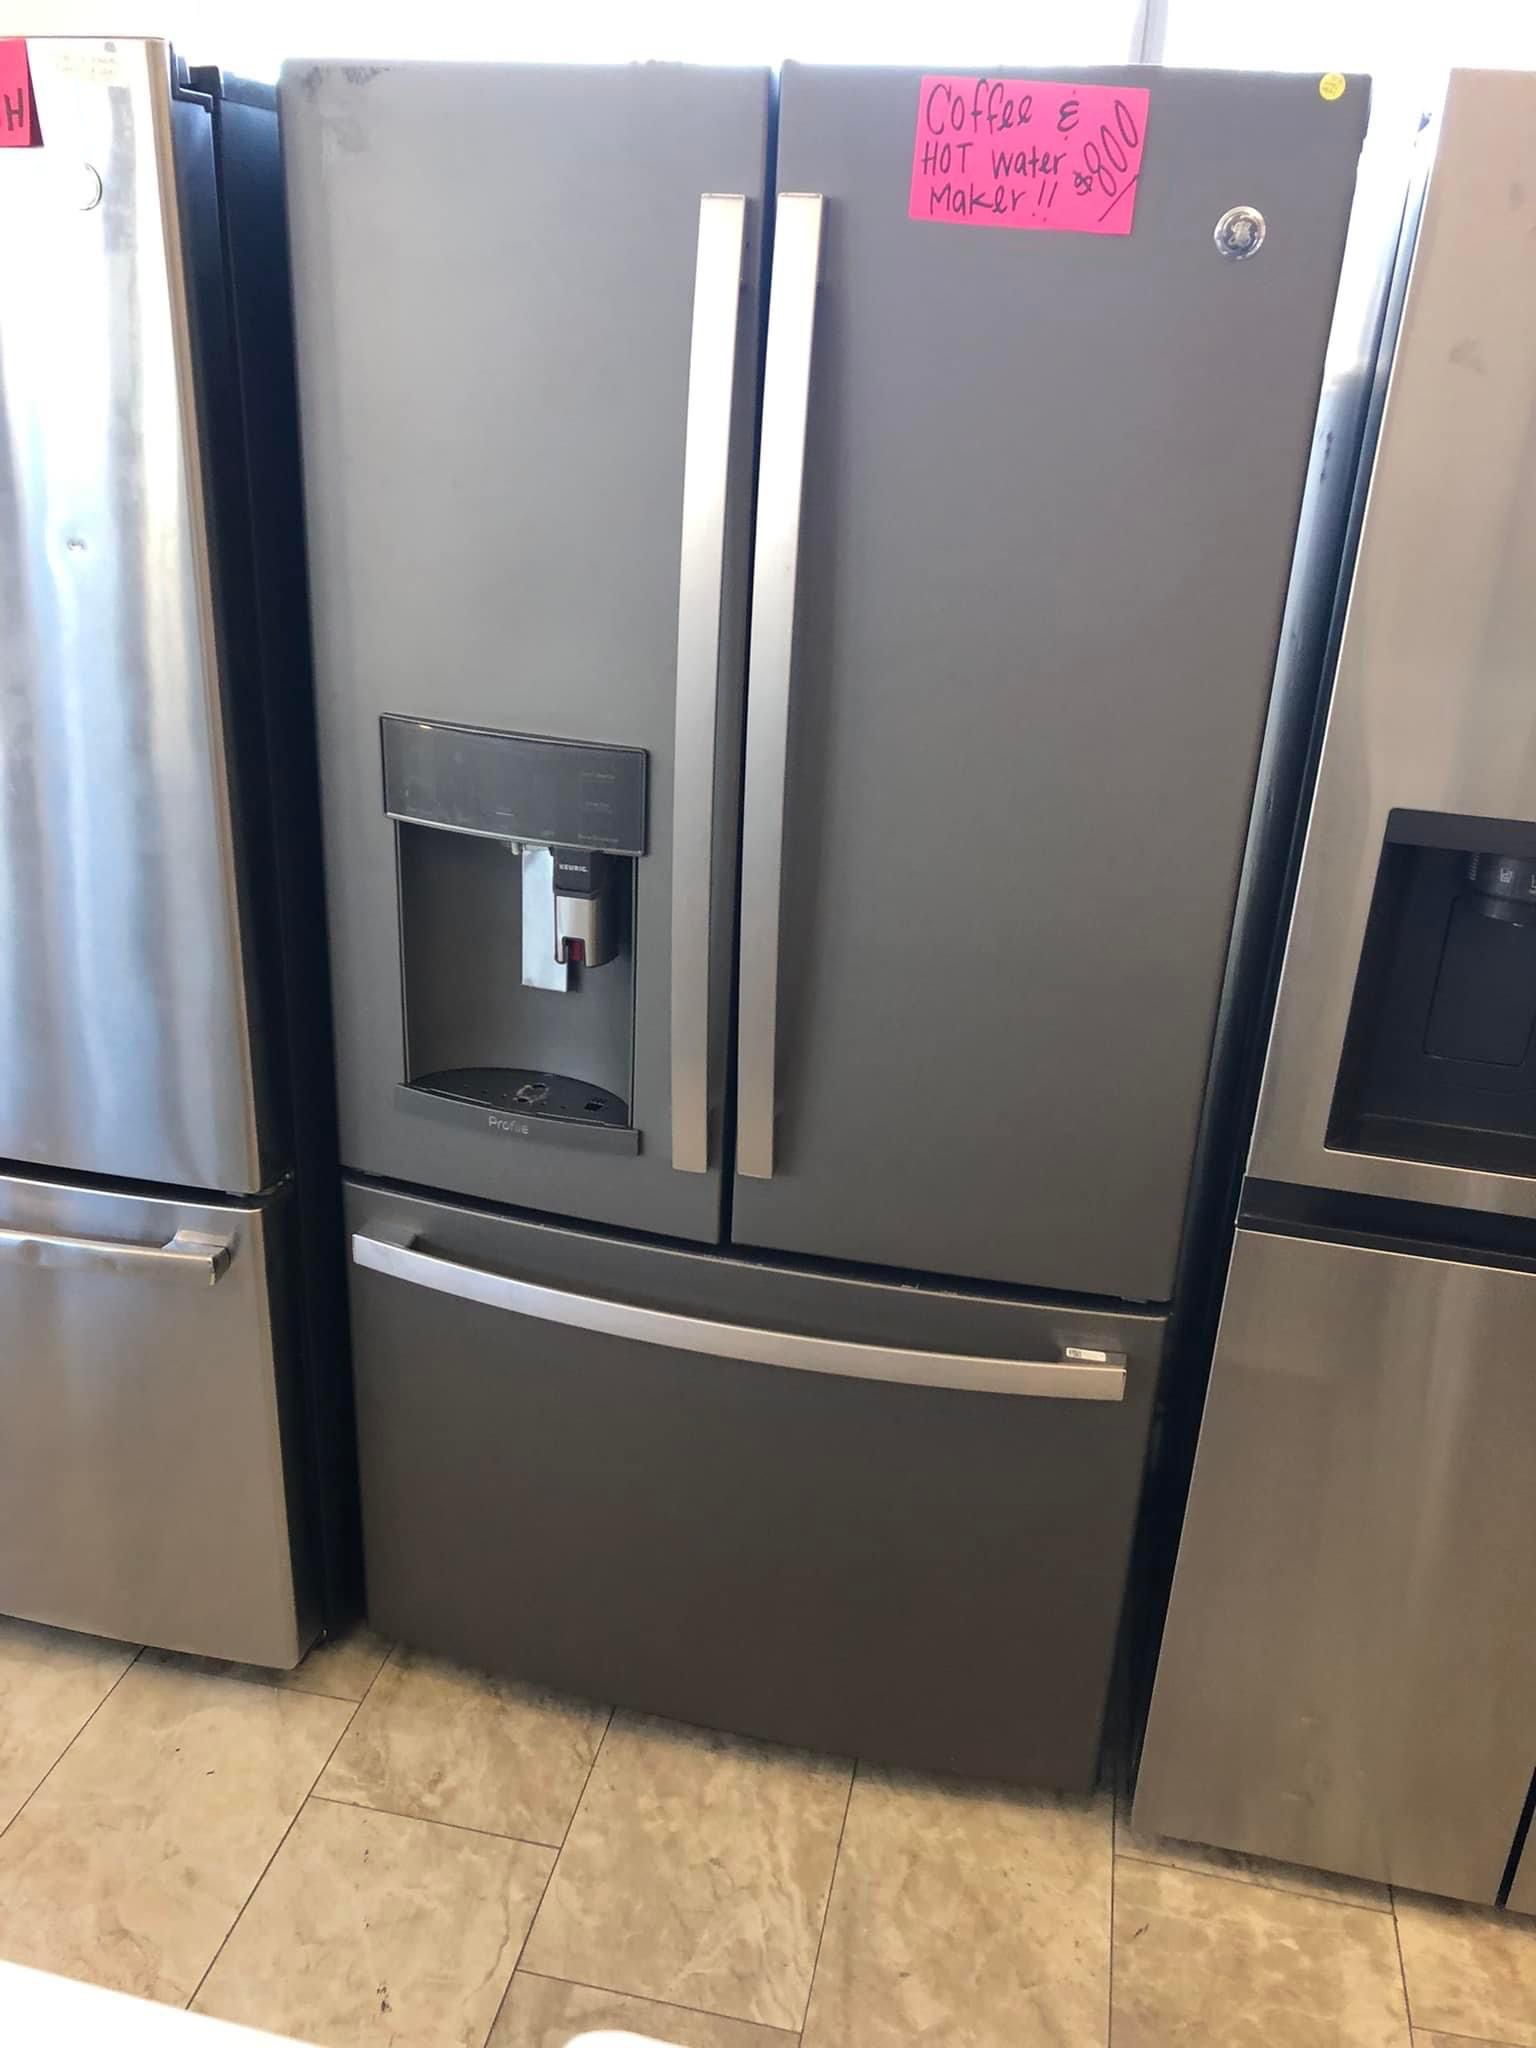 GE PROFILE SERIES ENERGY STAR 22.2 CU. FT. COUNTER-DEPTH FRENCH-DOOR REFRIGERATOR WITH KEURIG K-CUP BREWING SYSTEM  Model : PYE22PMKEES  Counter-depth